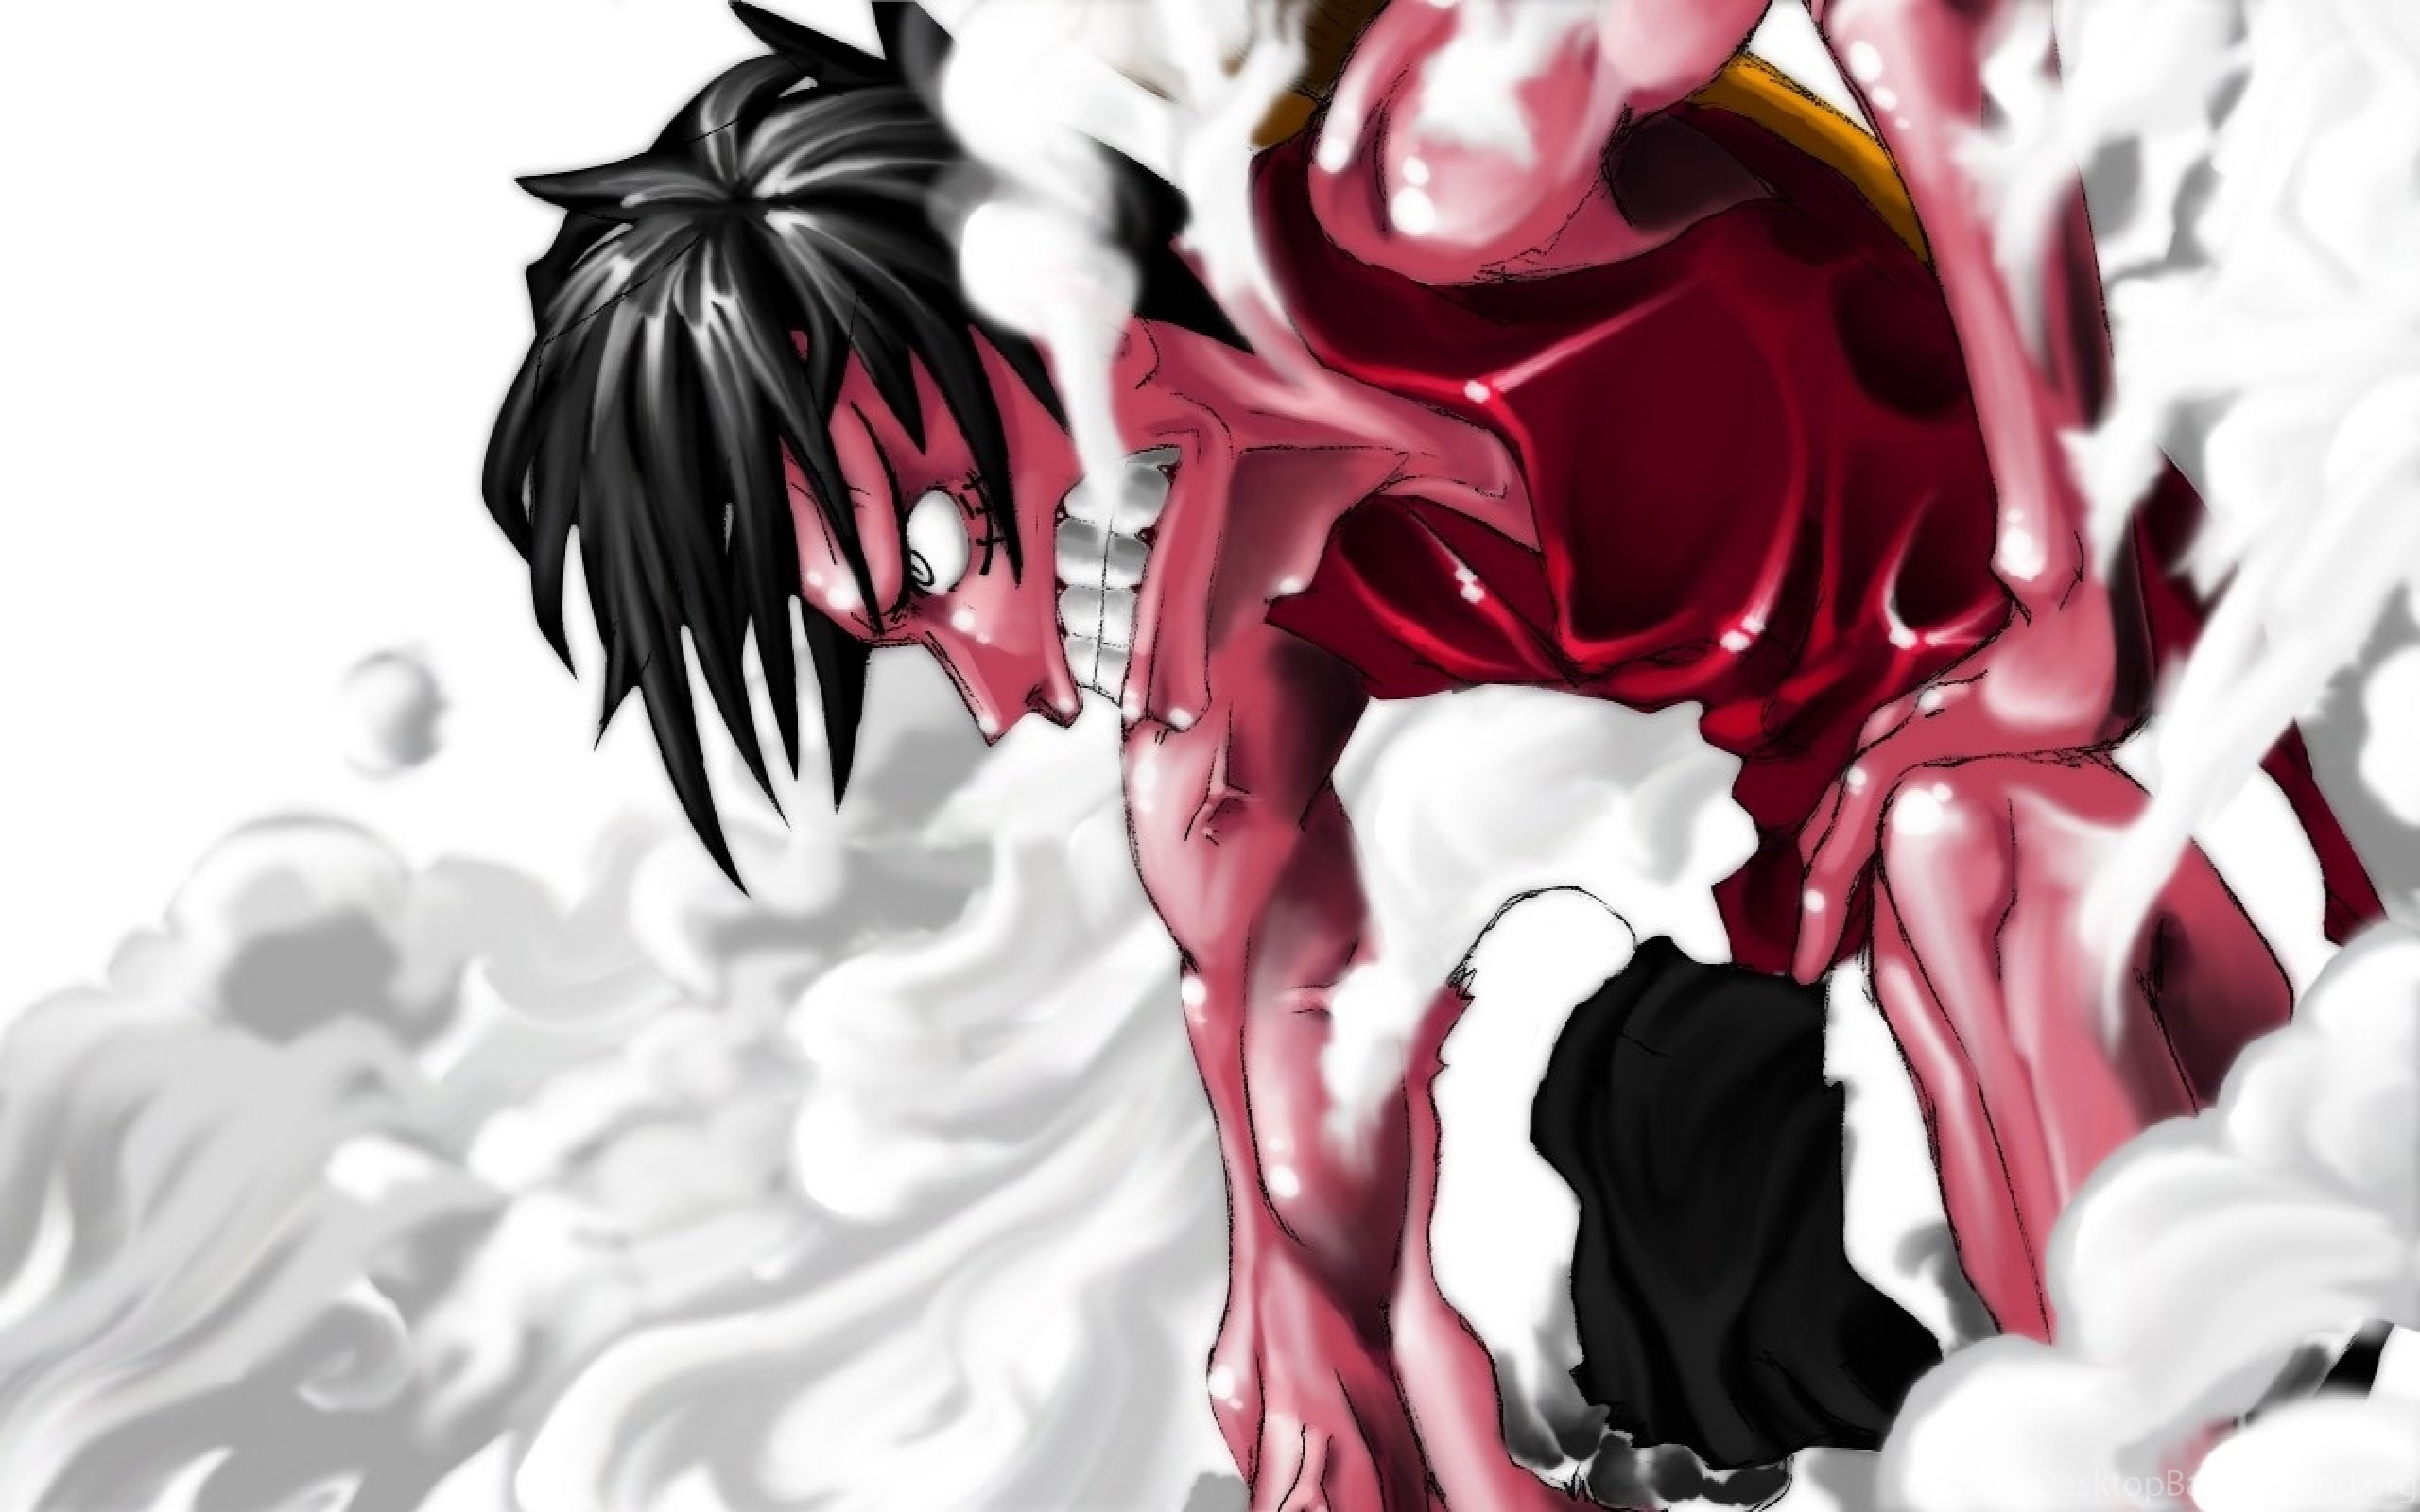  One  Piece  Luffy  Wallpapers  HD  Resolution Anime 